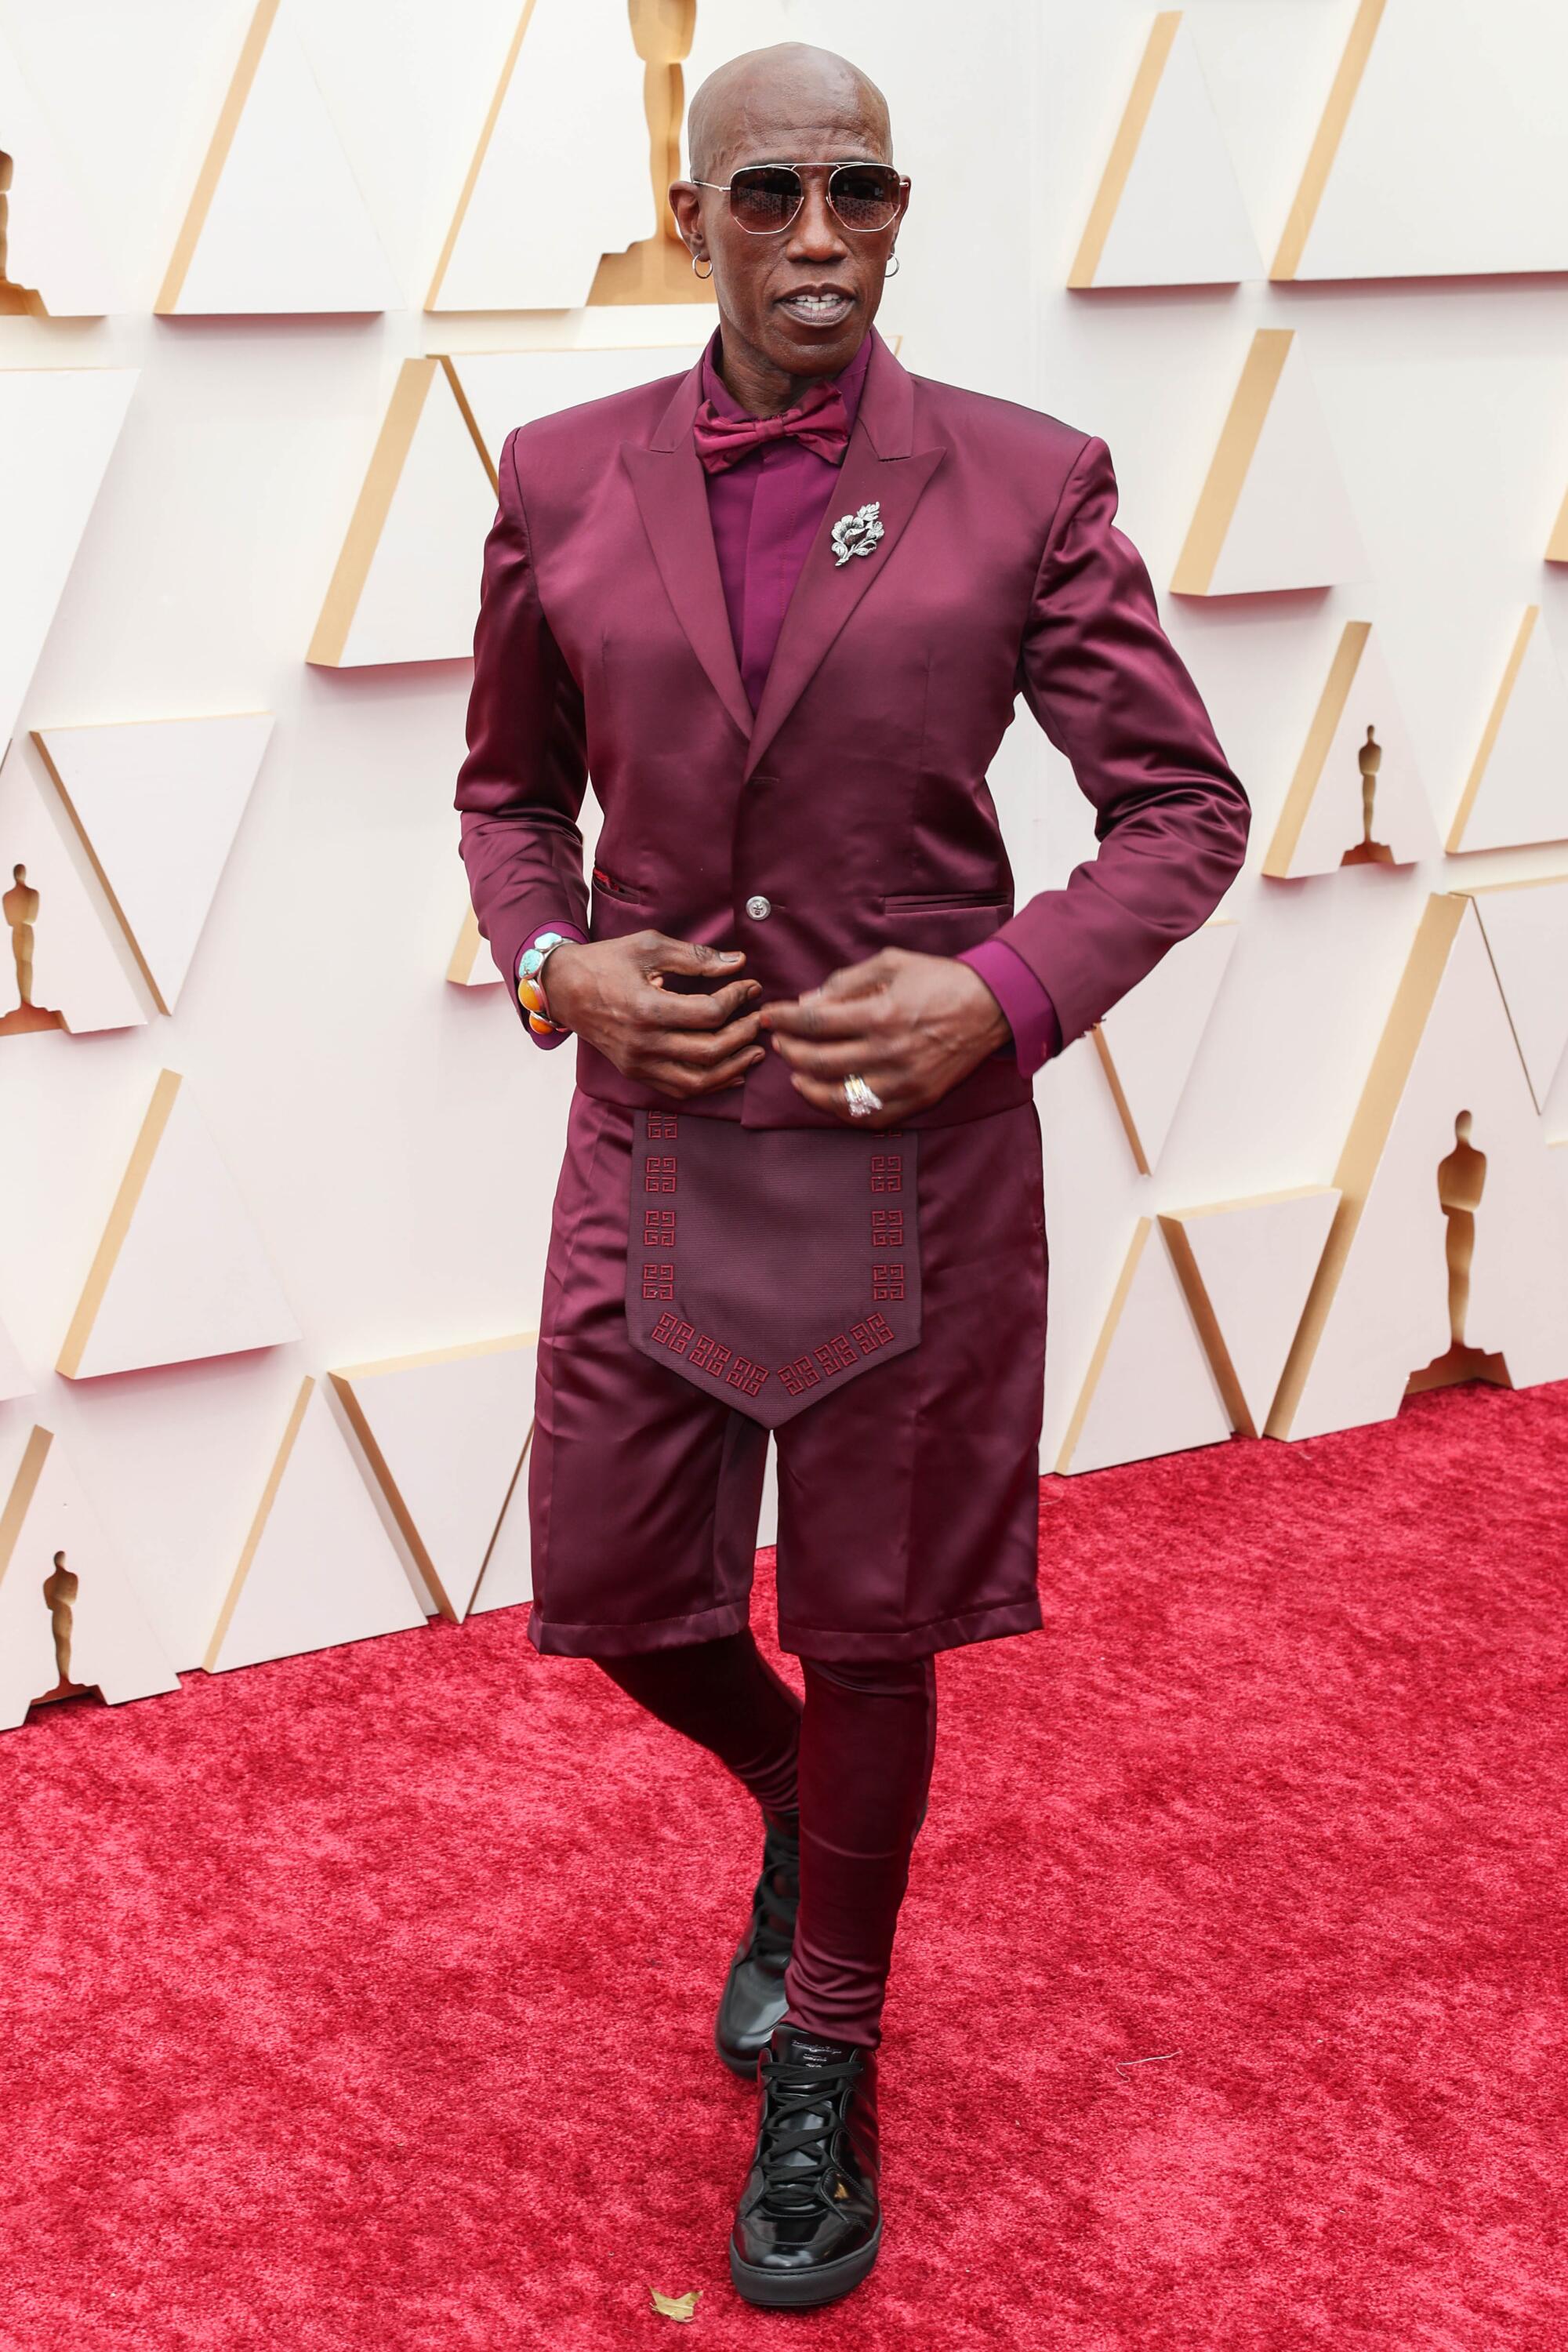 Wesley Snipes attends the 94th Academy Awards at the Dolby Theatre. (Jay L. Clendenin / Los Angeles Times)